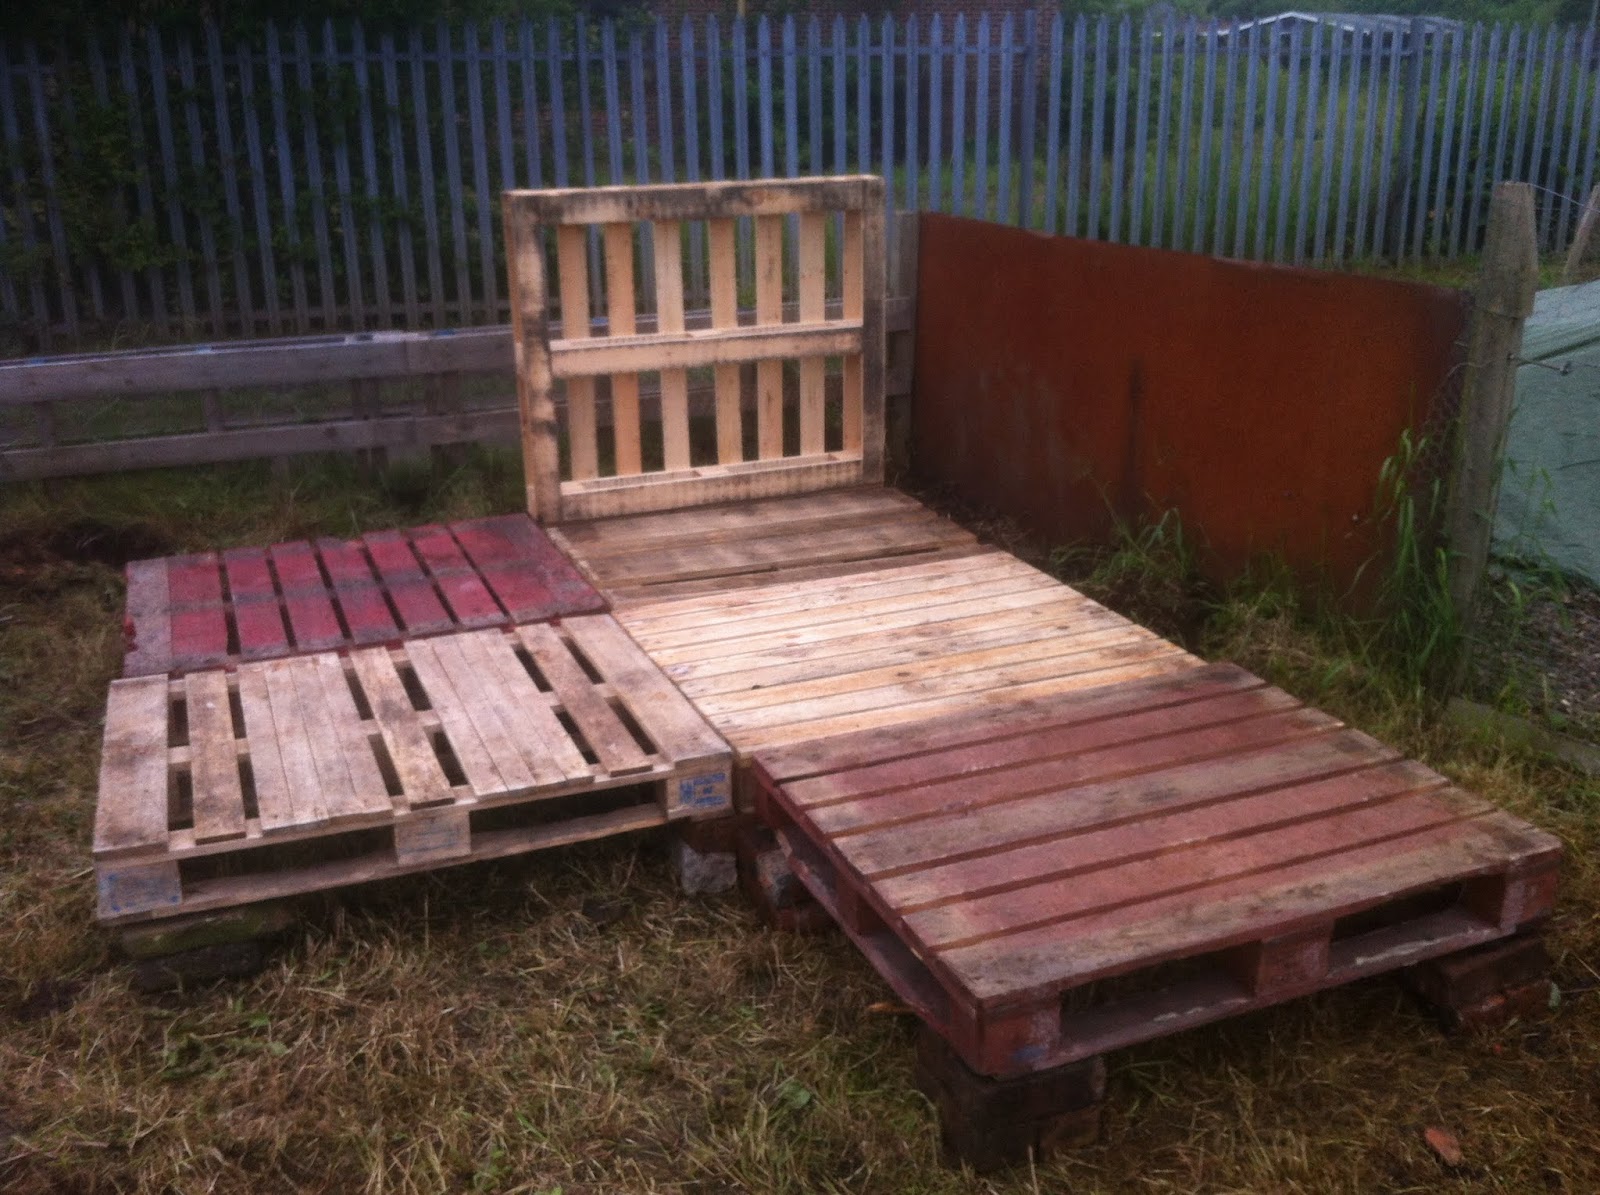 Building a Shed Out of Pallets